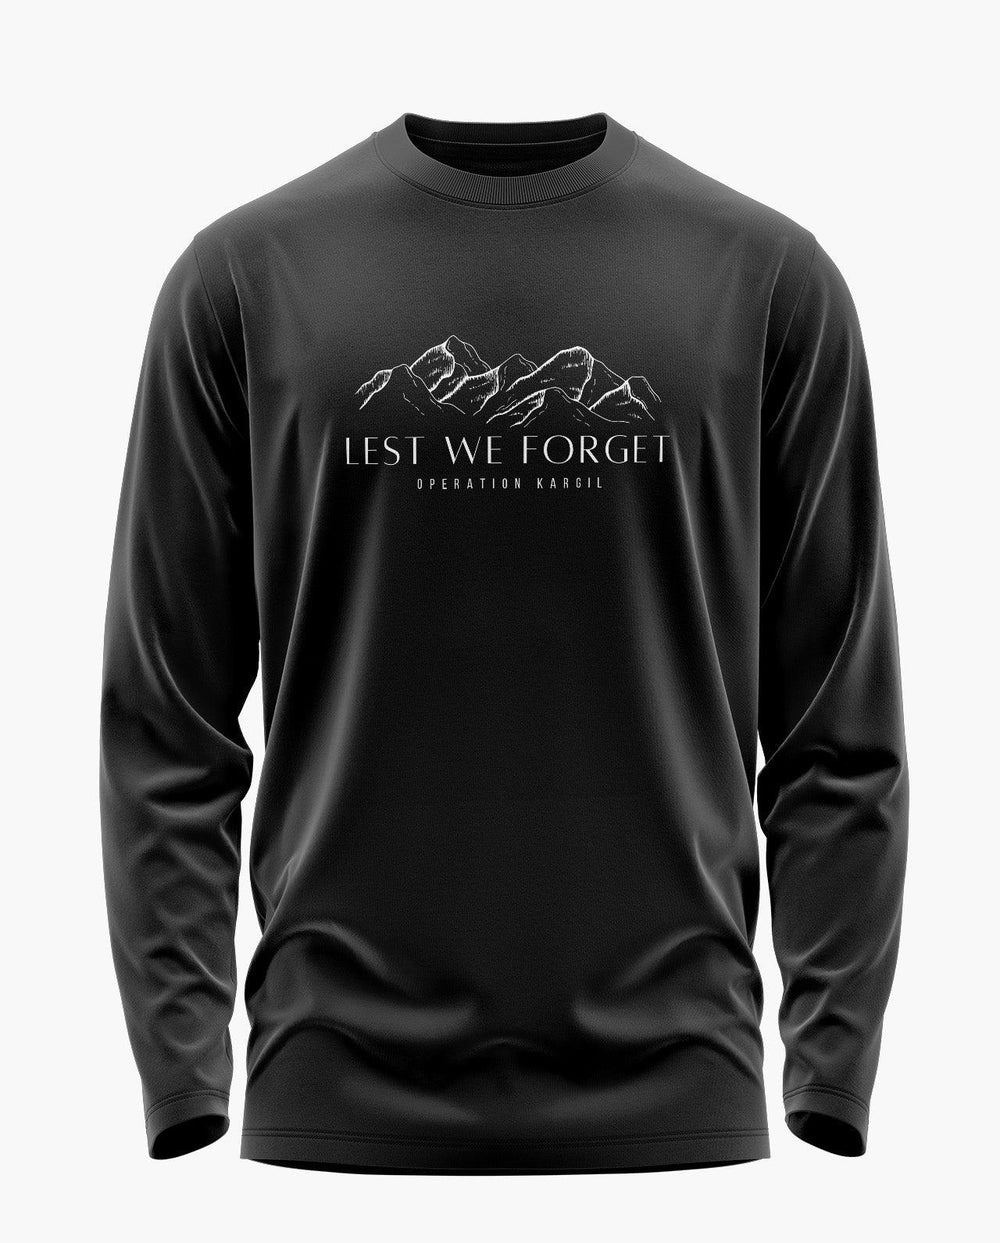 Lest we forget Full Sleeve T-Shirt - Aero Armour